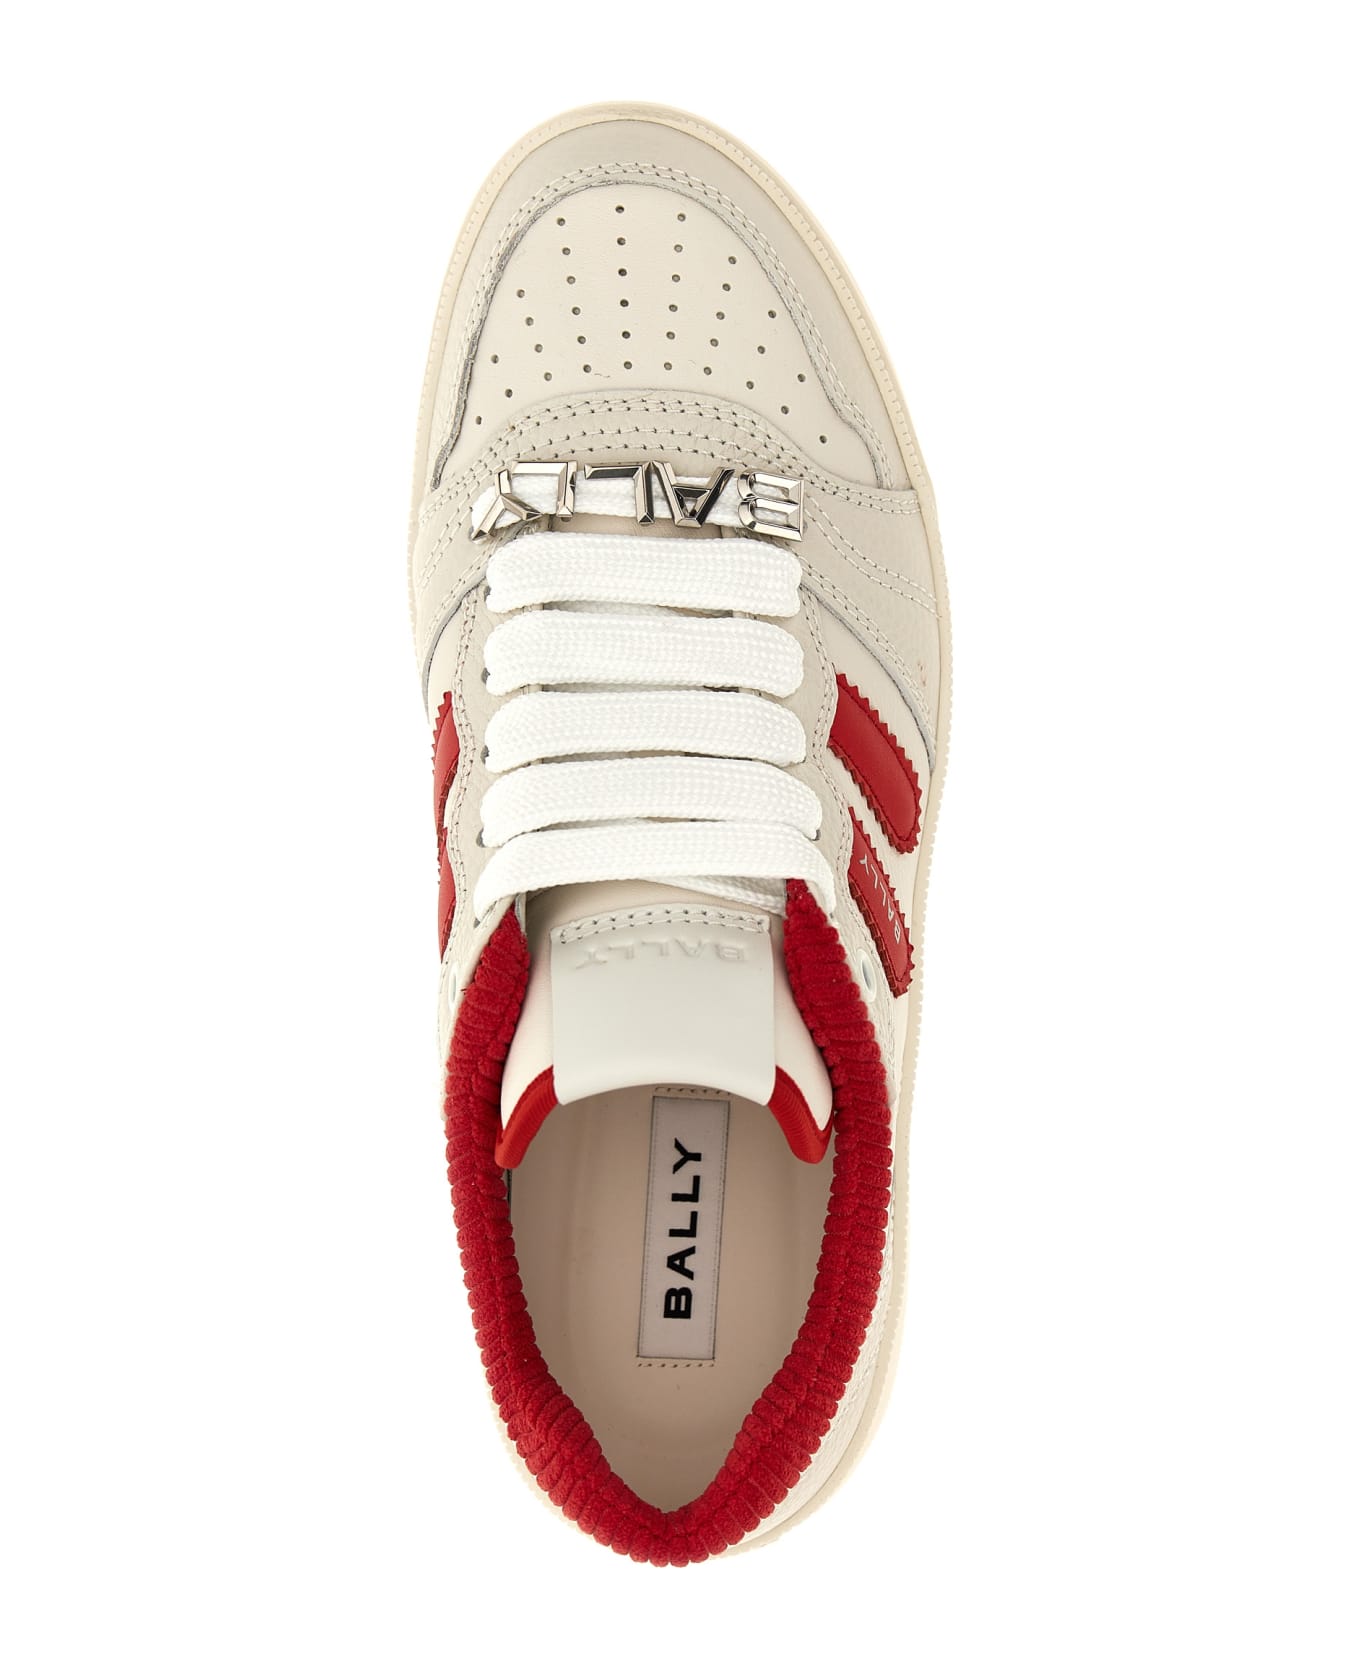 Bally 'royalty' Sneakers - WHITE/RED